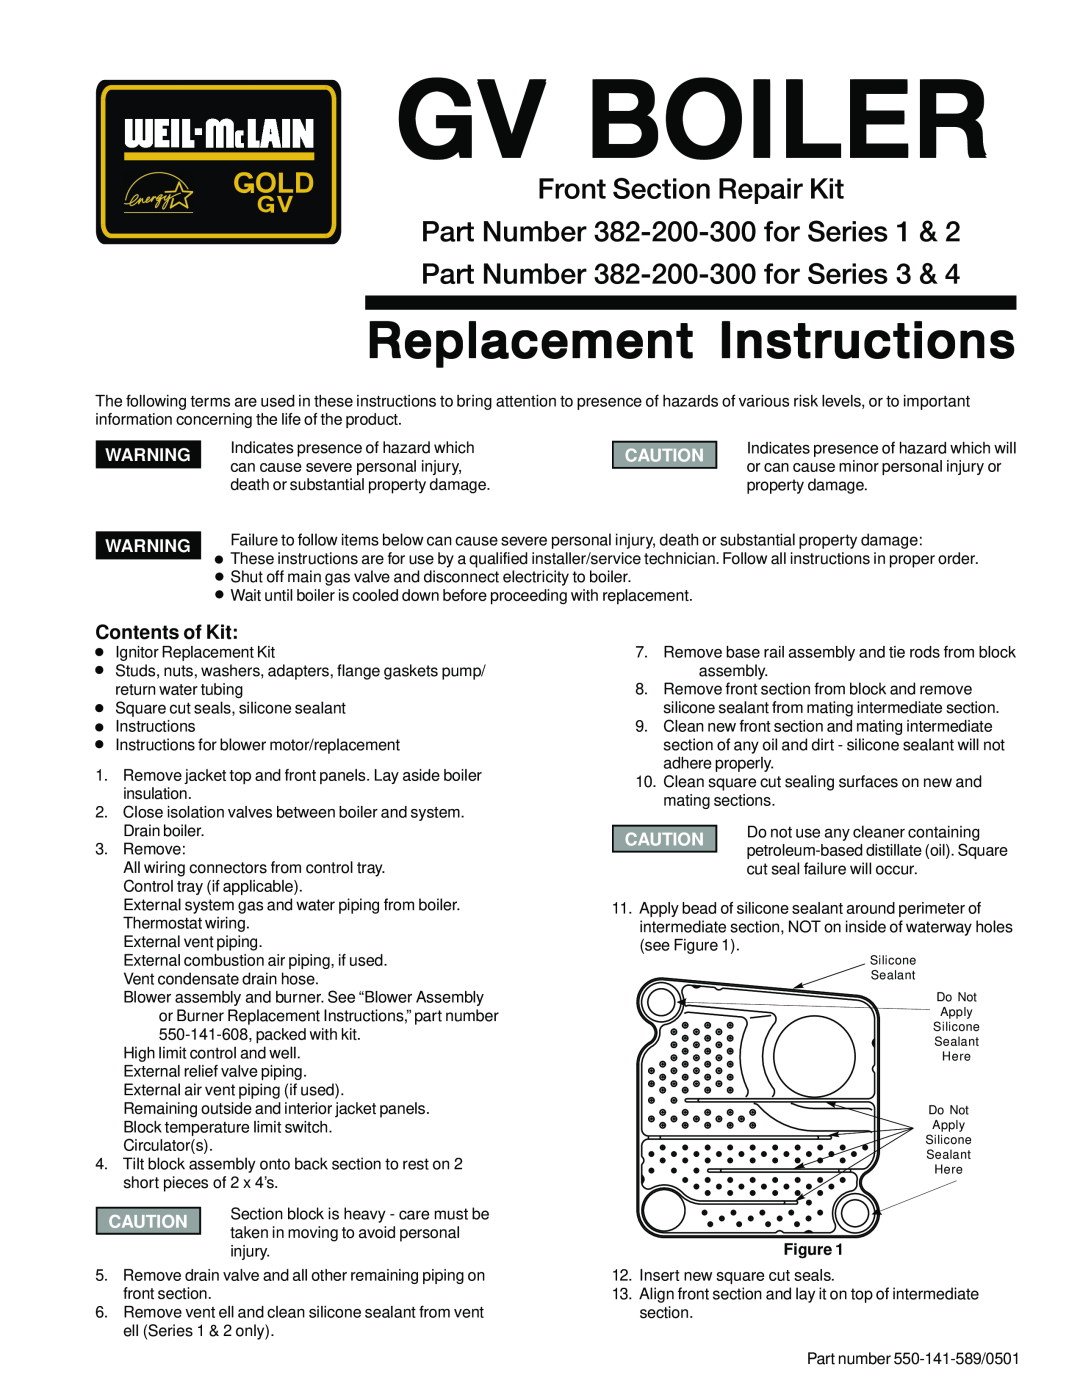 Weil-McLain 382-200-300 manual Gv Boiler, Replacement Instructions, Front Section Repair Kit, Contents of Kit 